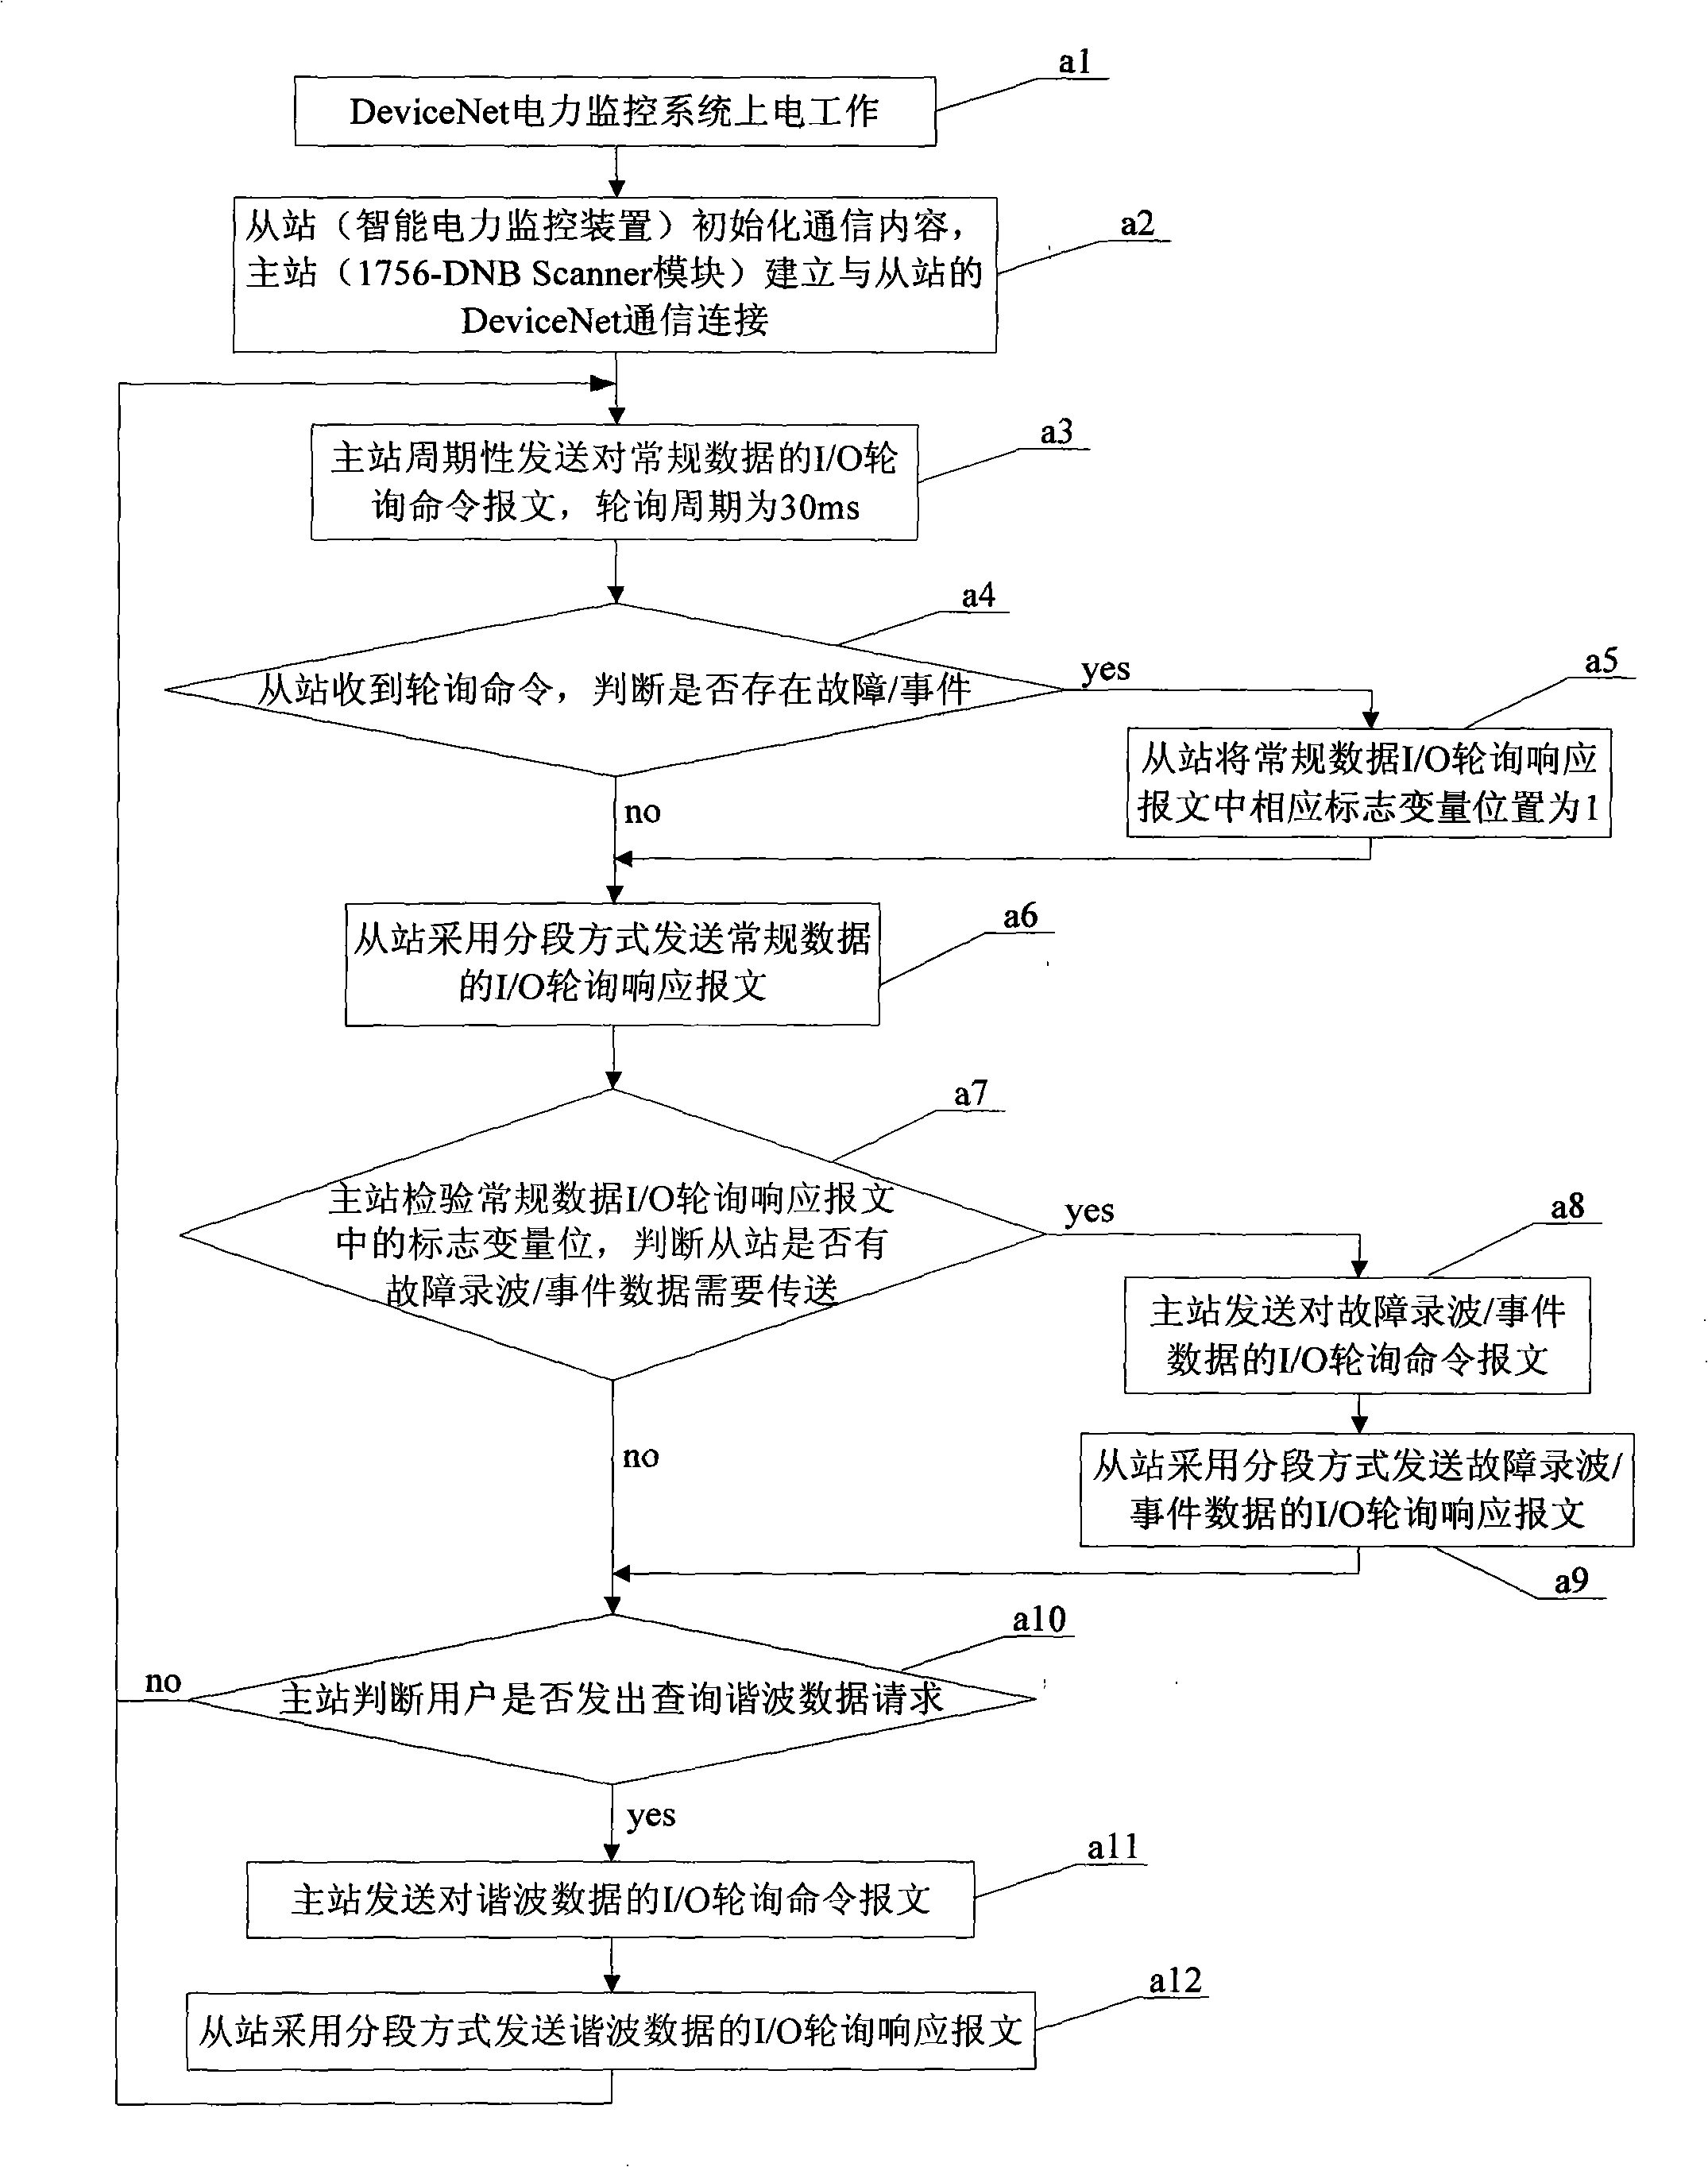 Intelligent electric power monitoring apparatus and large data size corresponding method for Rockwell controller